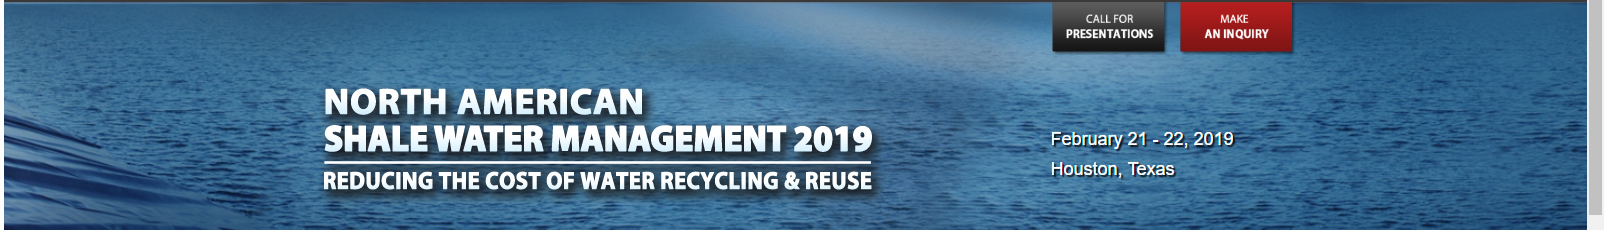 North American Shale Water Management 2019 Exhibition and Conference, Houston, Texas, United States